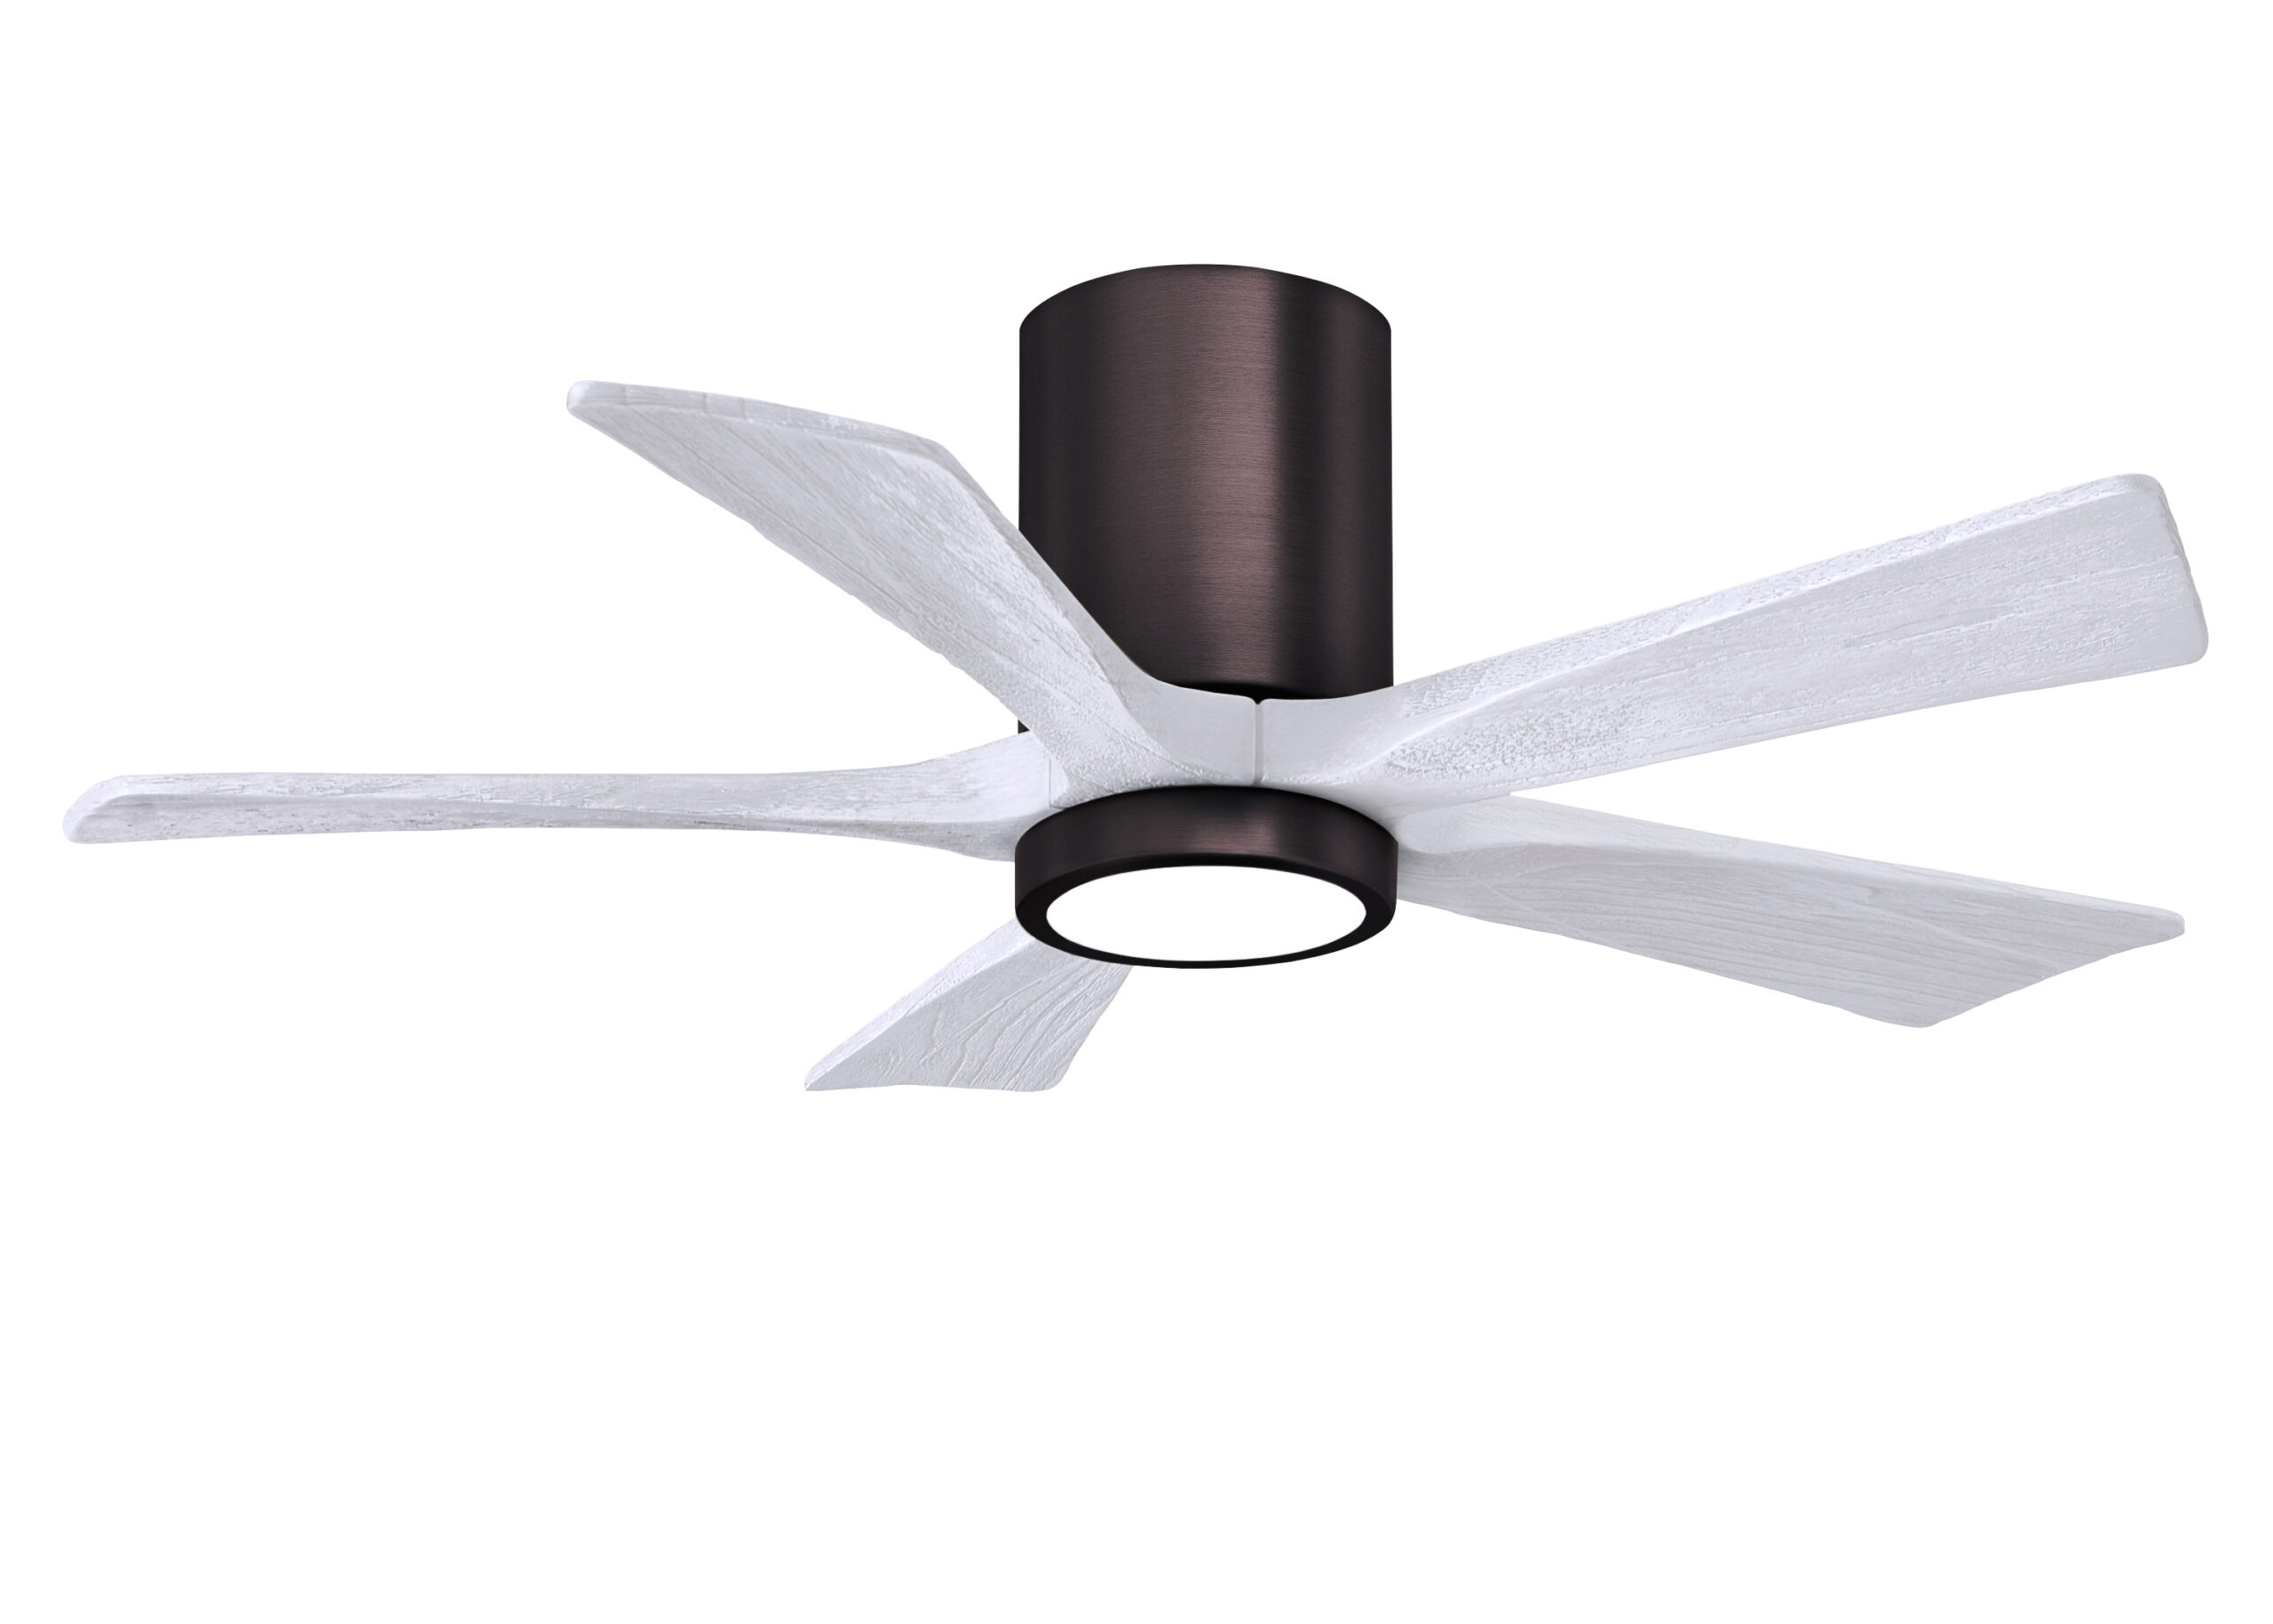 Irene-5HLK Ceiling Fan in Brushed Bronze Finish with 42